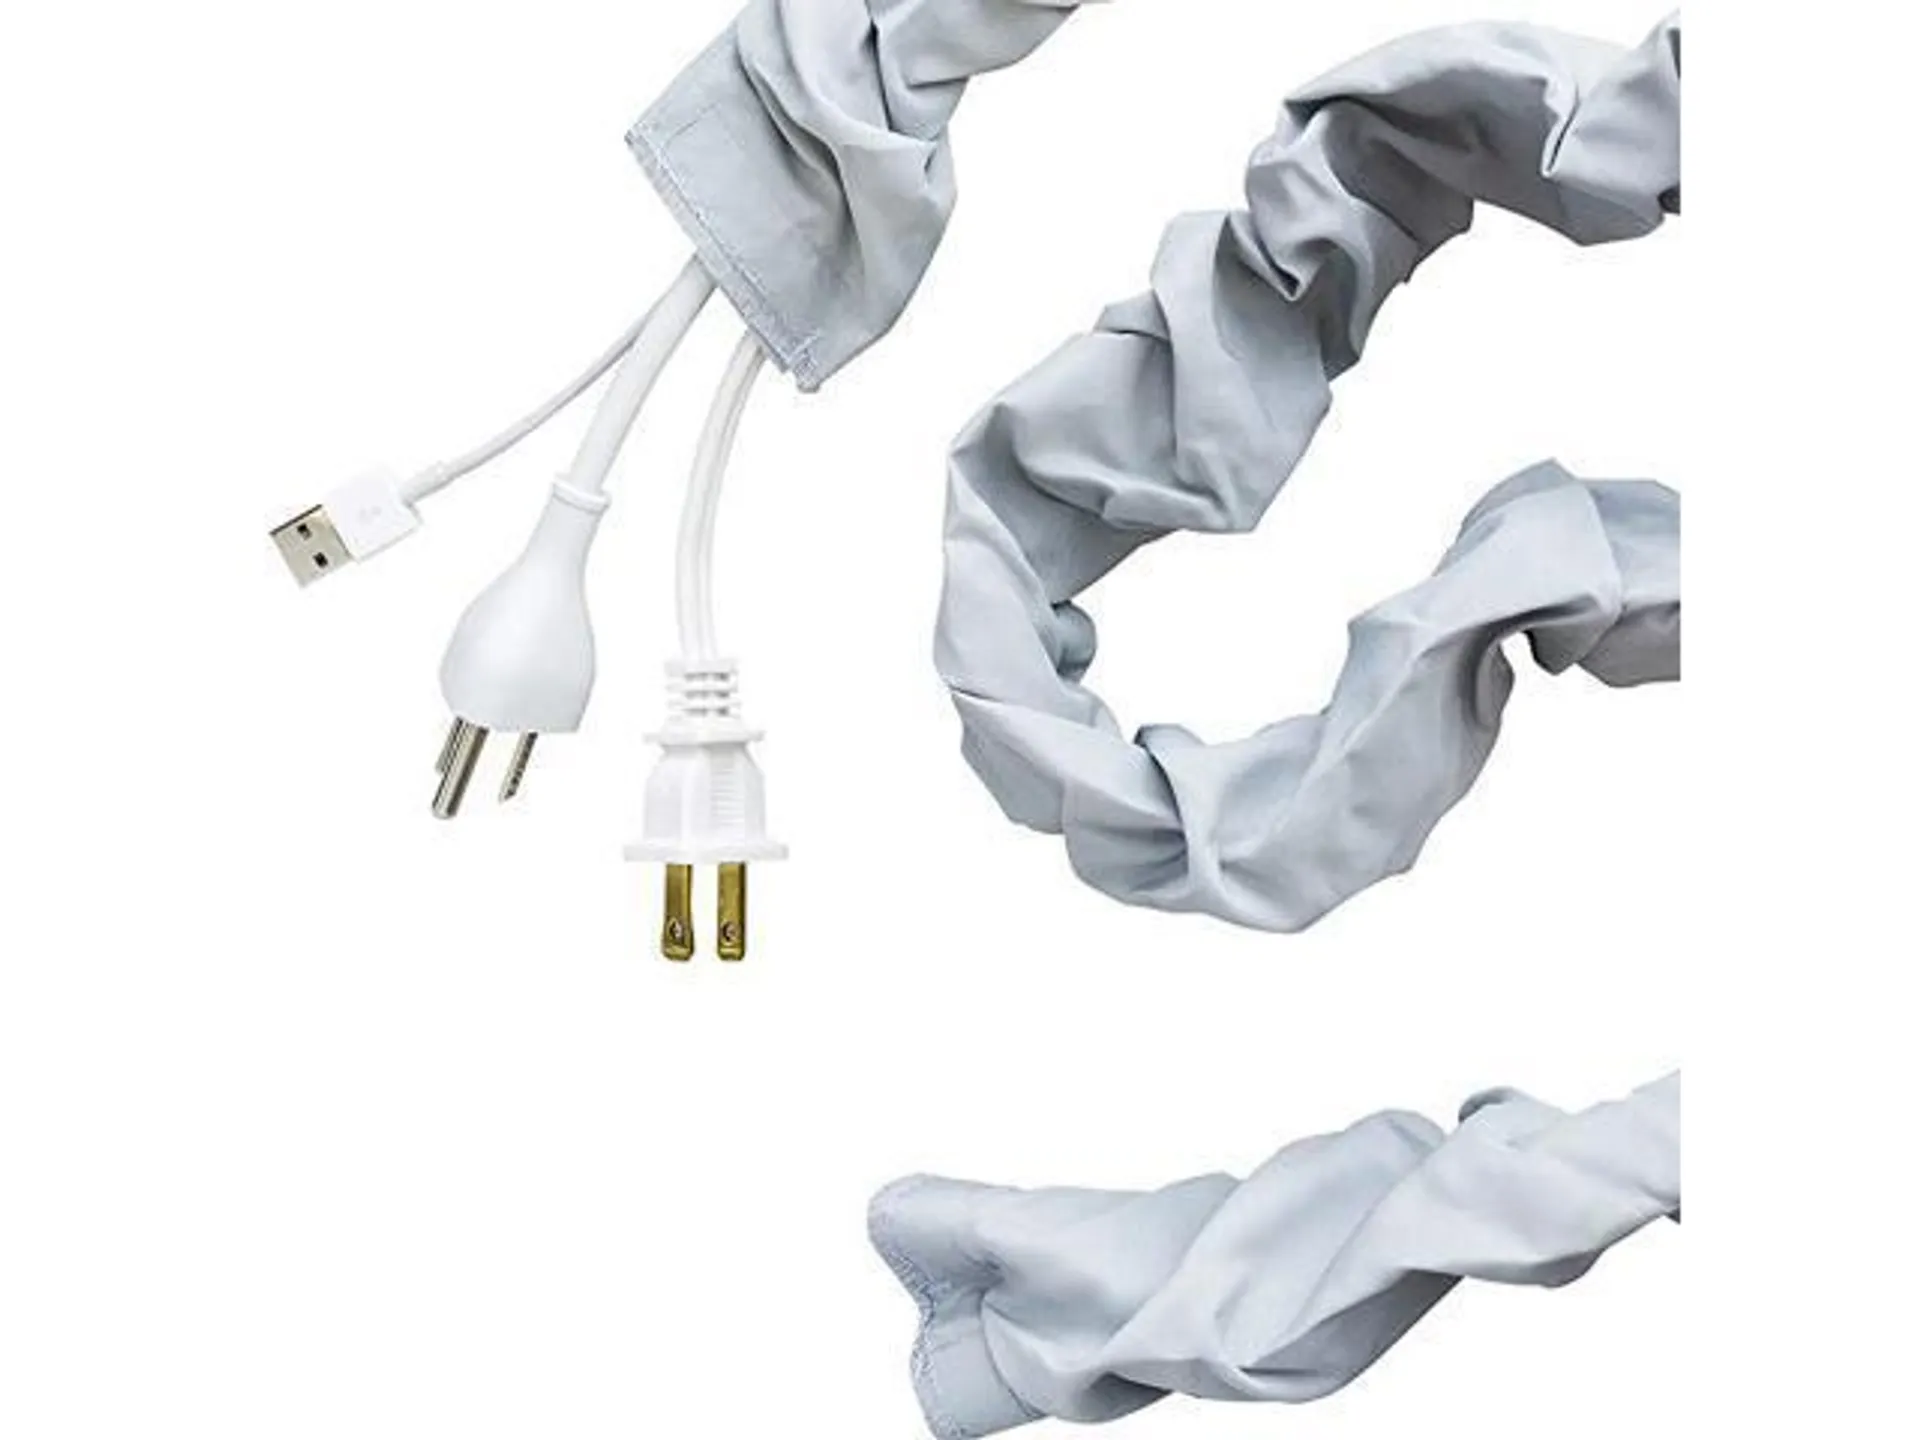 Fabric Cord Cover 2 Pack, 6 Ft, Cable Management and Hider, Easy Installation, Great for Lamps, Light Fixtures, and Desks, Heather Gray, 48659